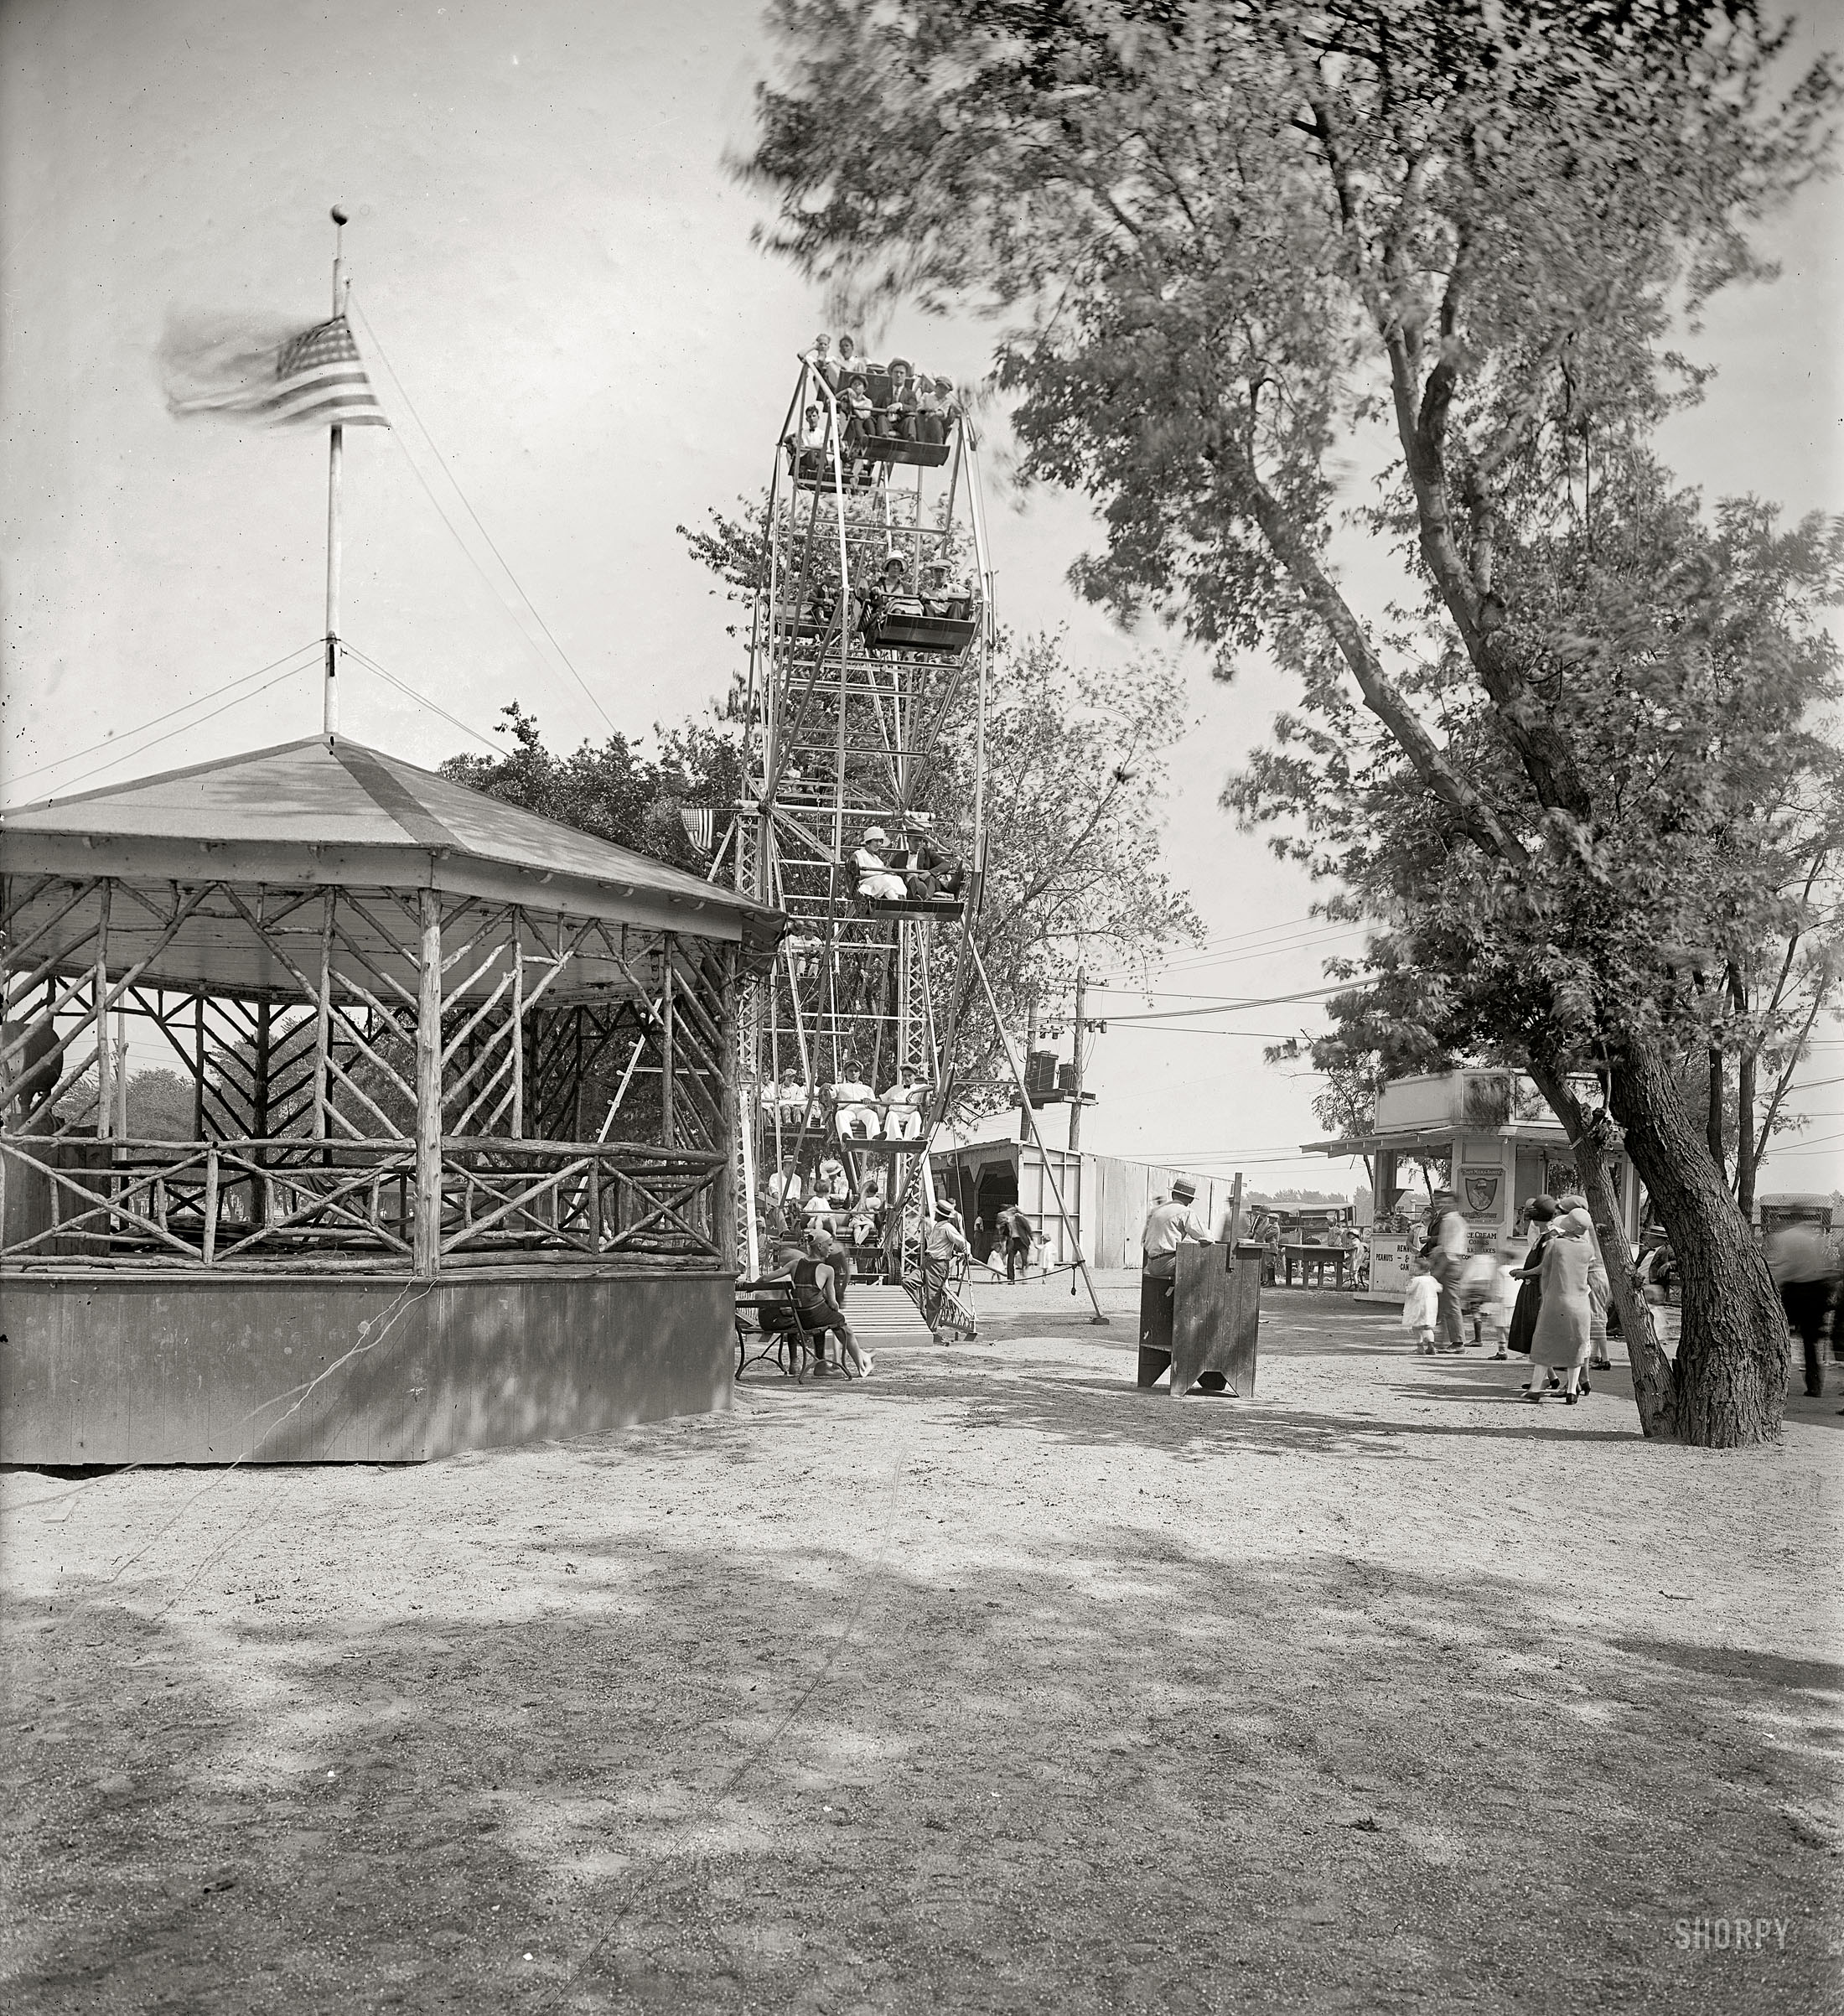 Circa 1925. "Arlington Beach." An amusement park in the general vicinity of today's Pentagon, removed in 1929 to make way for an airport expansion. National Photo Company Collection glass negative. View full size.